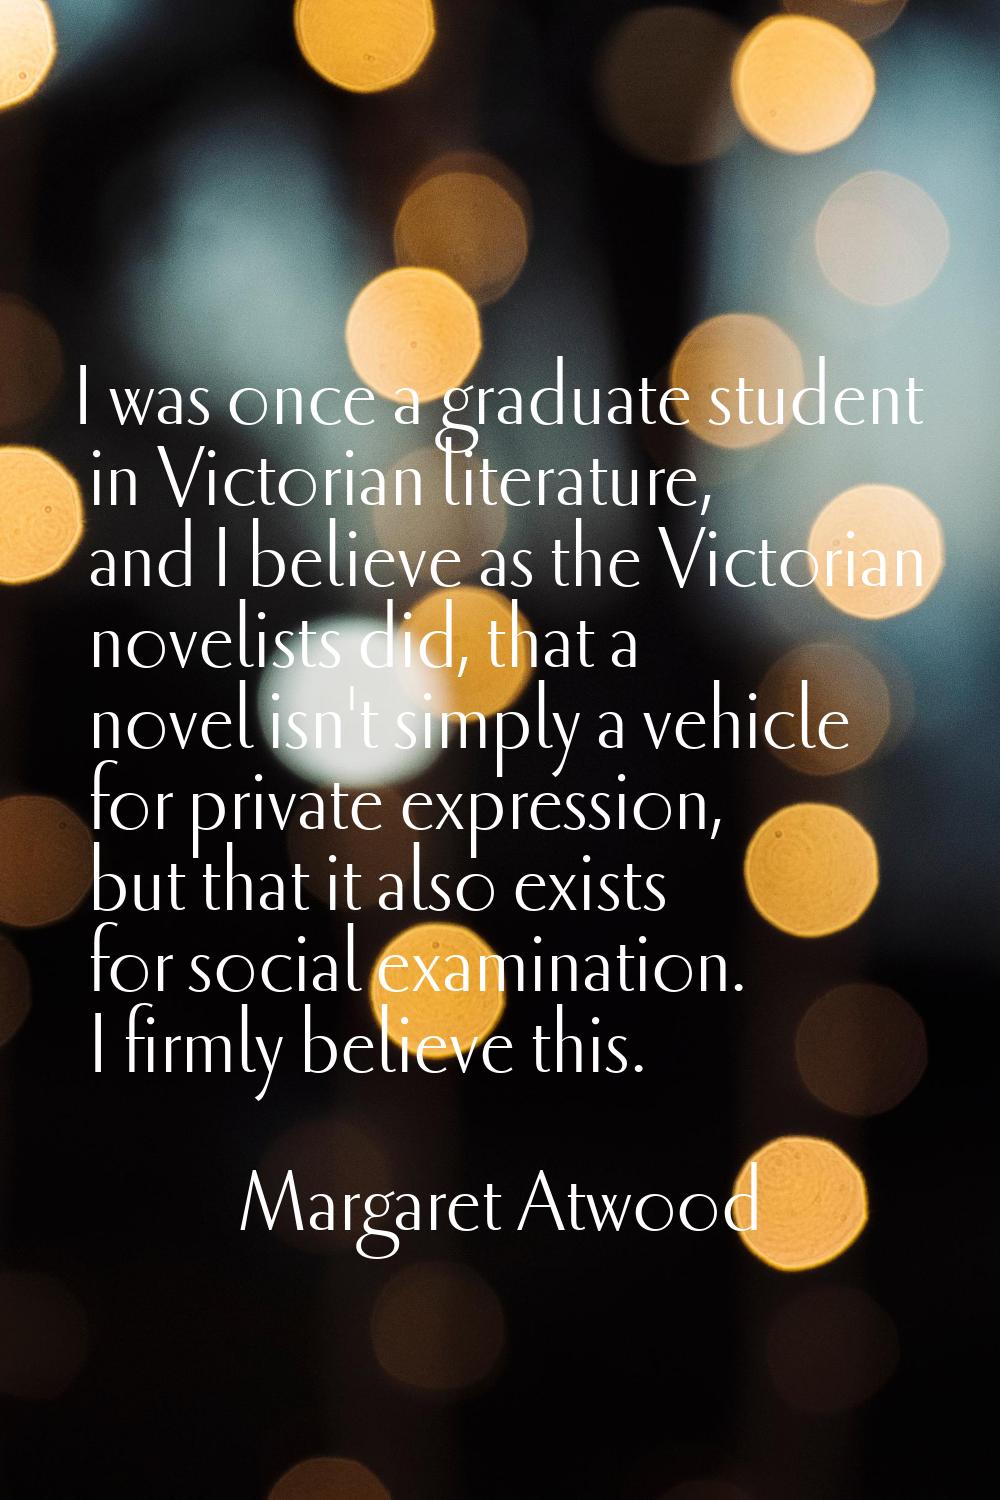 I was once a graduate student in Victorian literature, and I believe as the Victorian novelists did